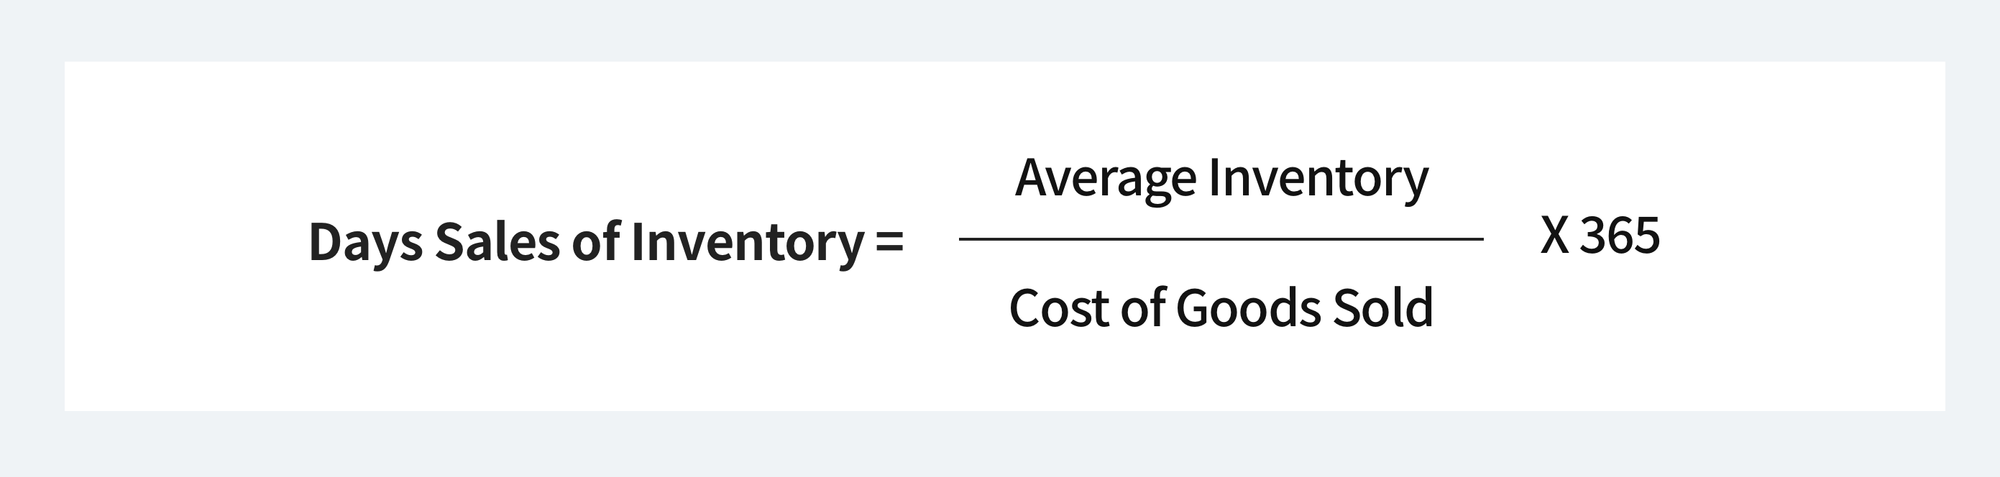 Days Sell in Inventory = (Average Inventory / COGS) x 365